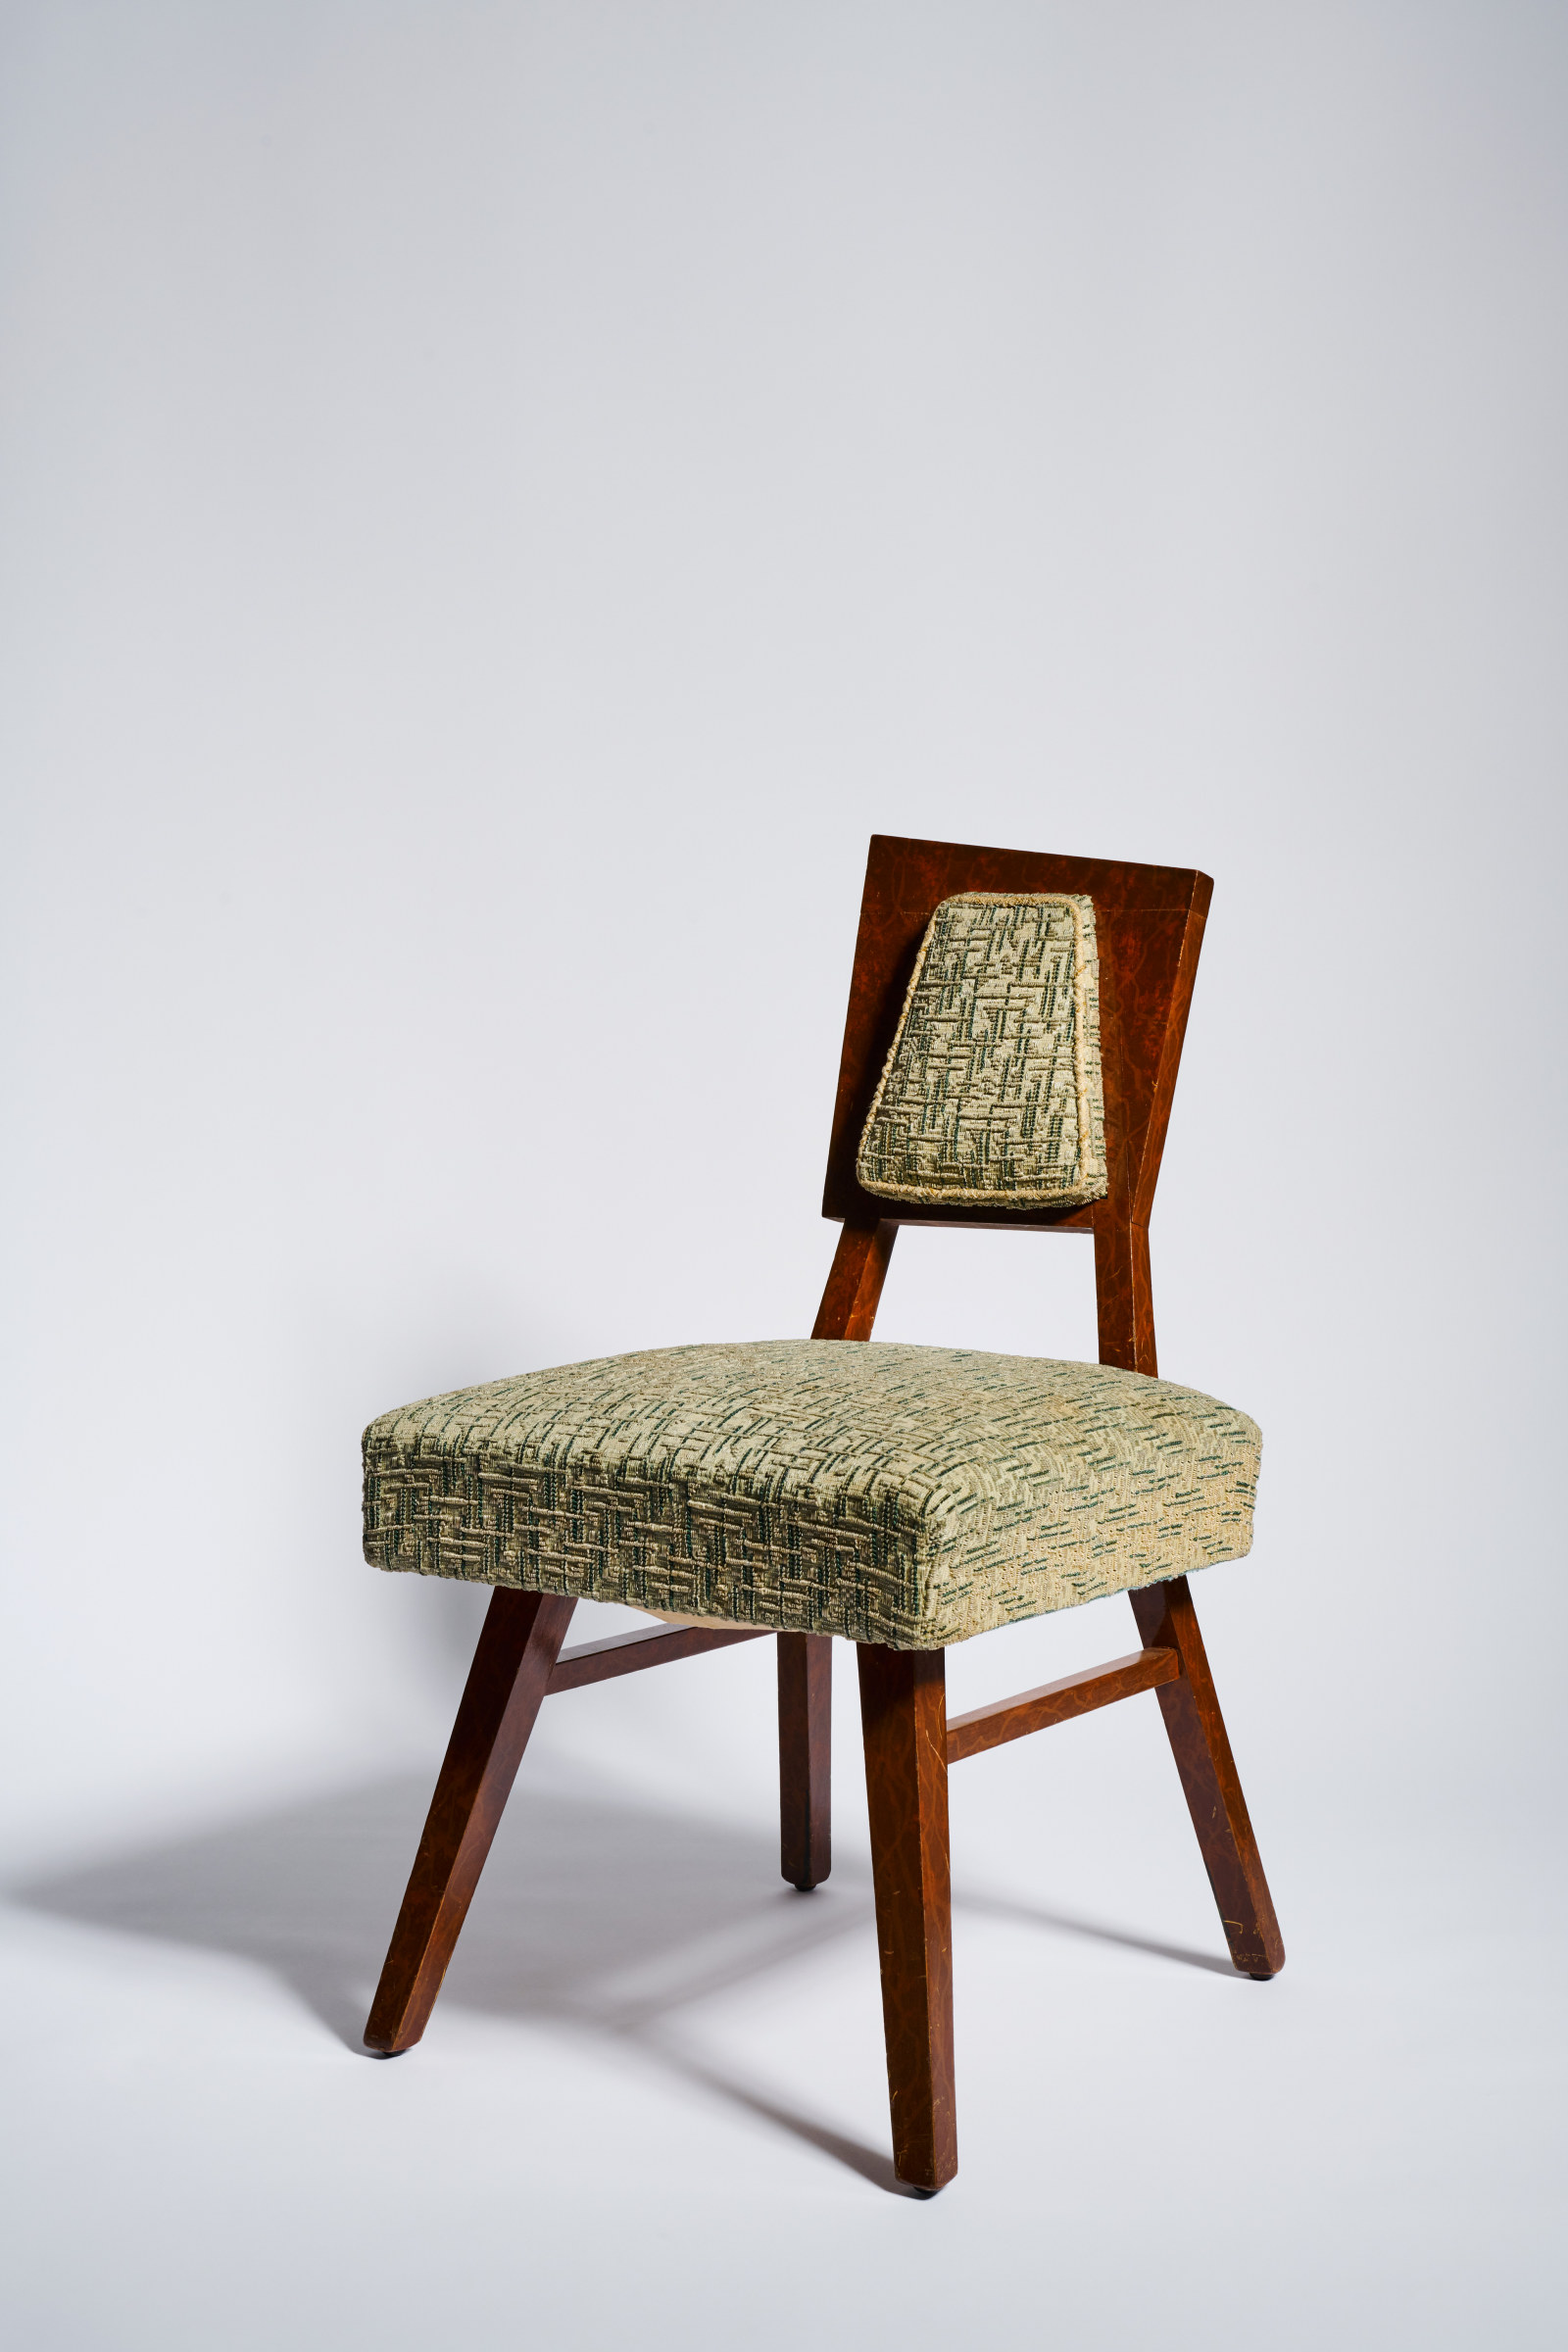 Dining chair, Paul Kafka, Sydney, c1958 from Caroline Simpson Research Collection